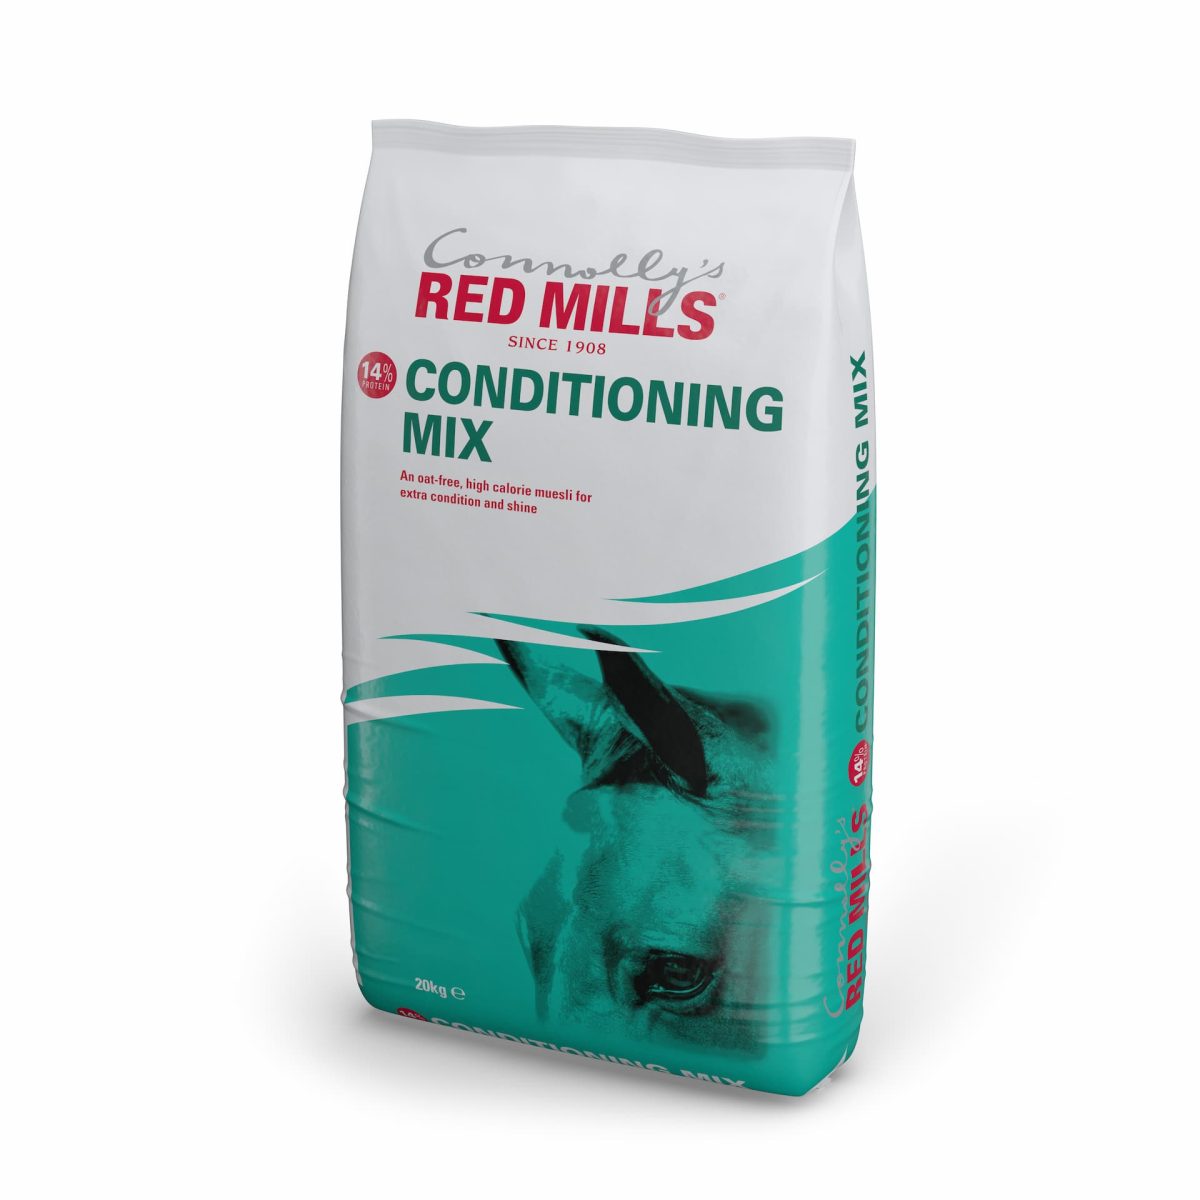 RED MILLS 14% Conditioning Mix | High for condition